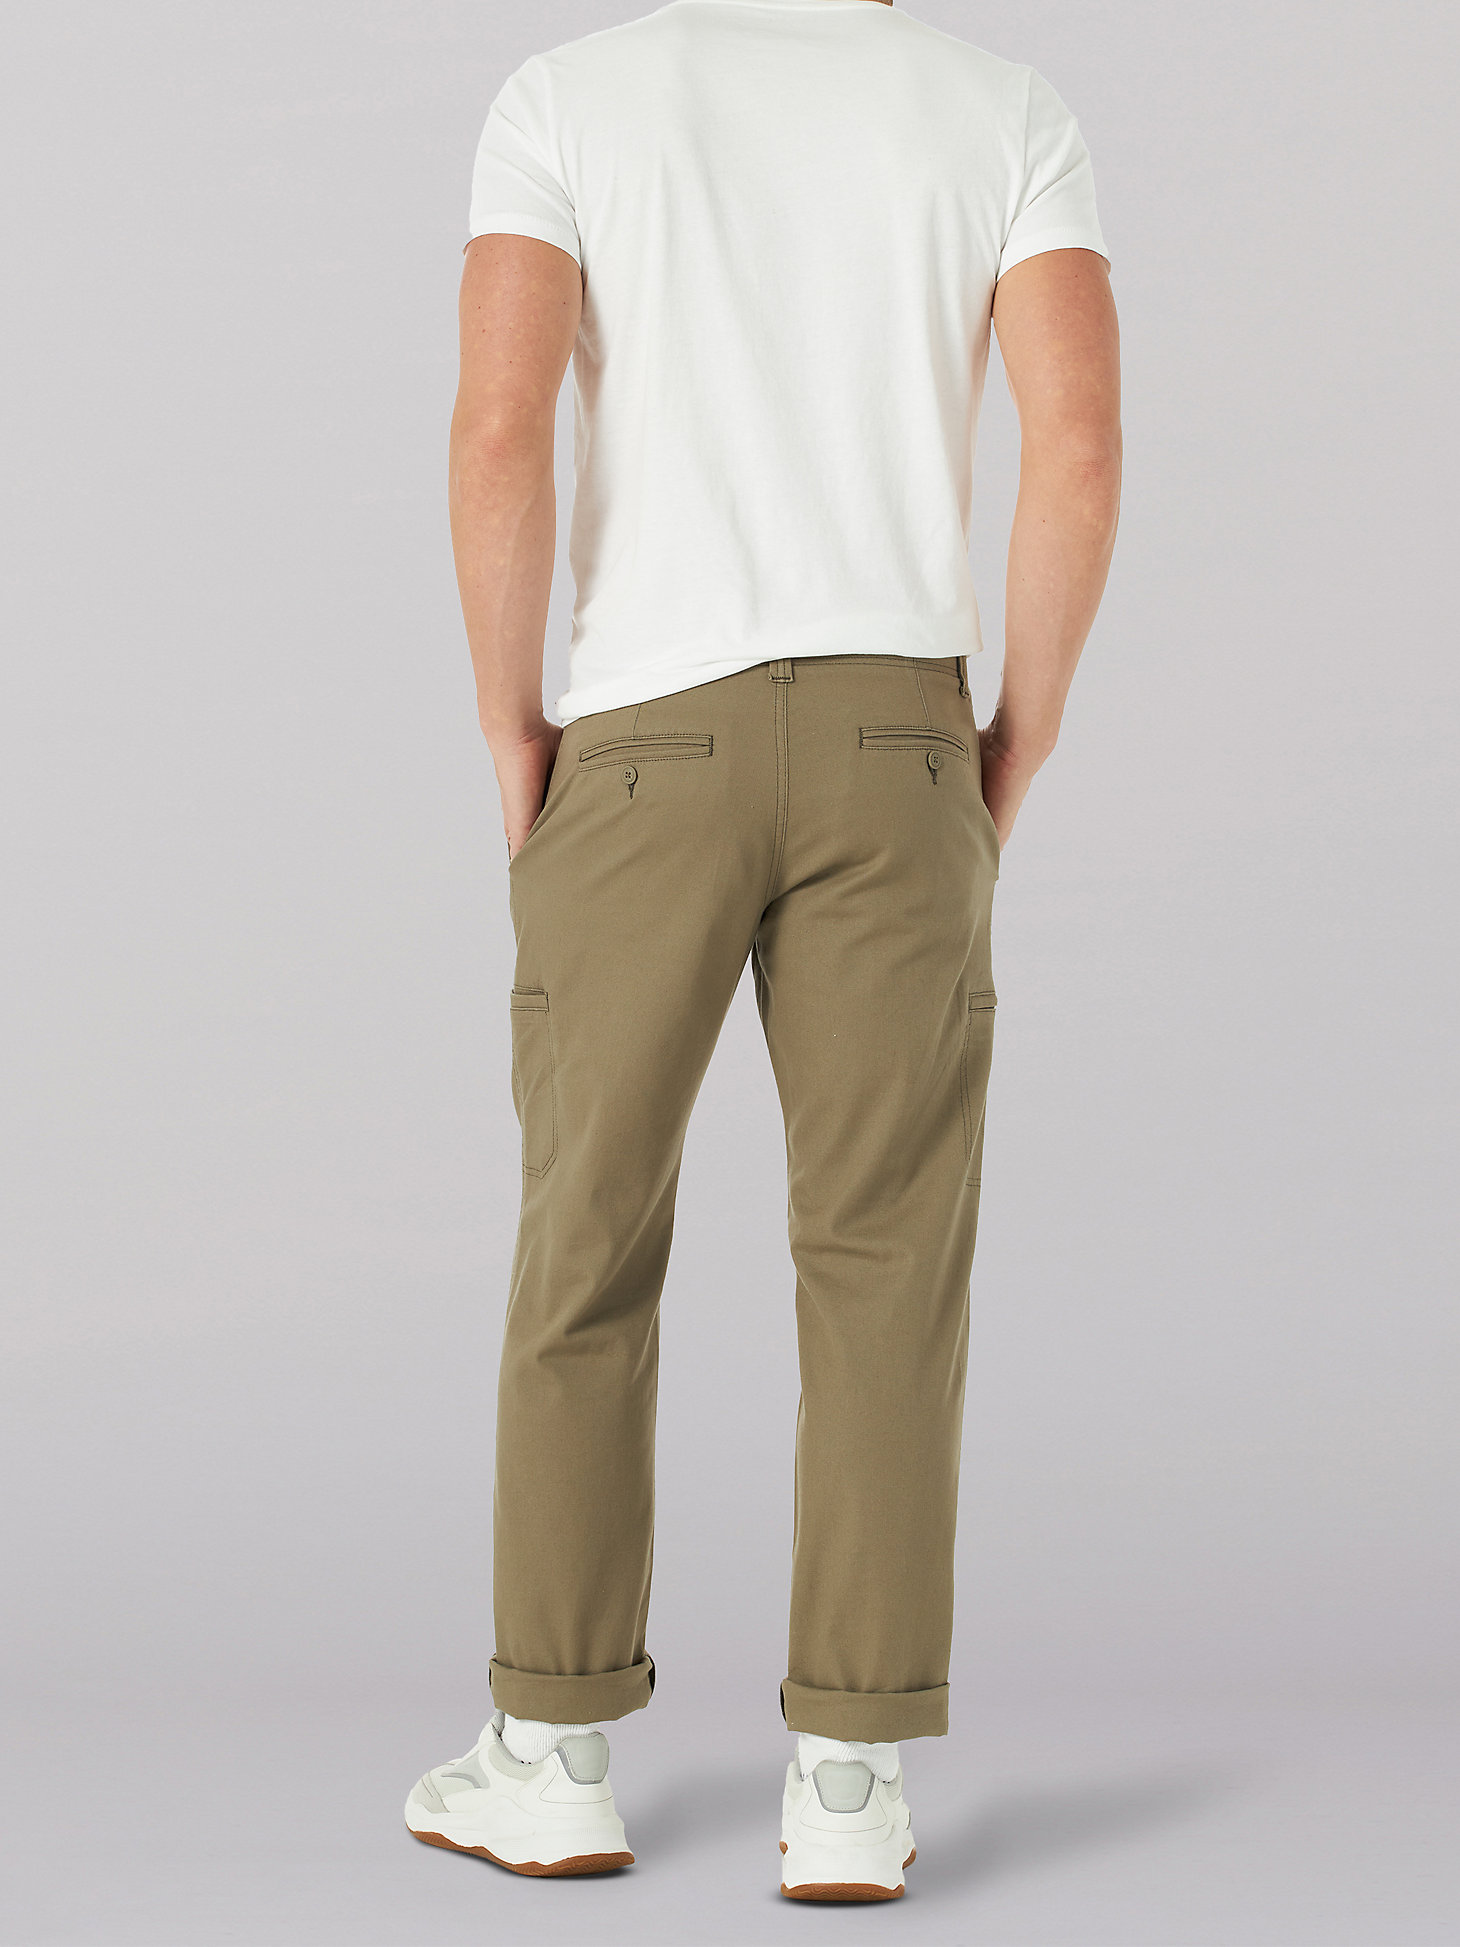 Men's Extreme Comfort Straight Fit Cargo Pant in Sirus alternative view 1